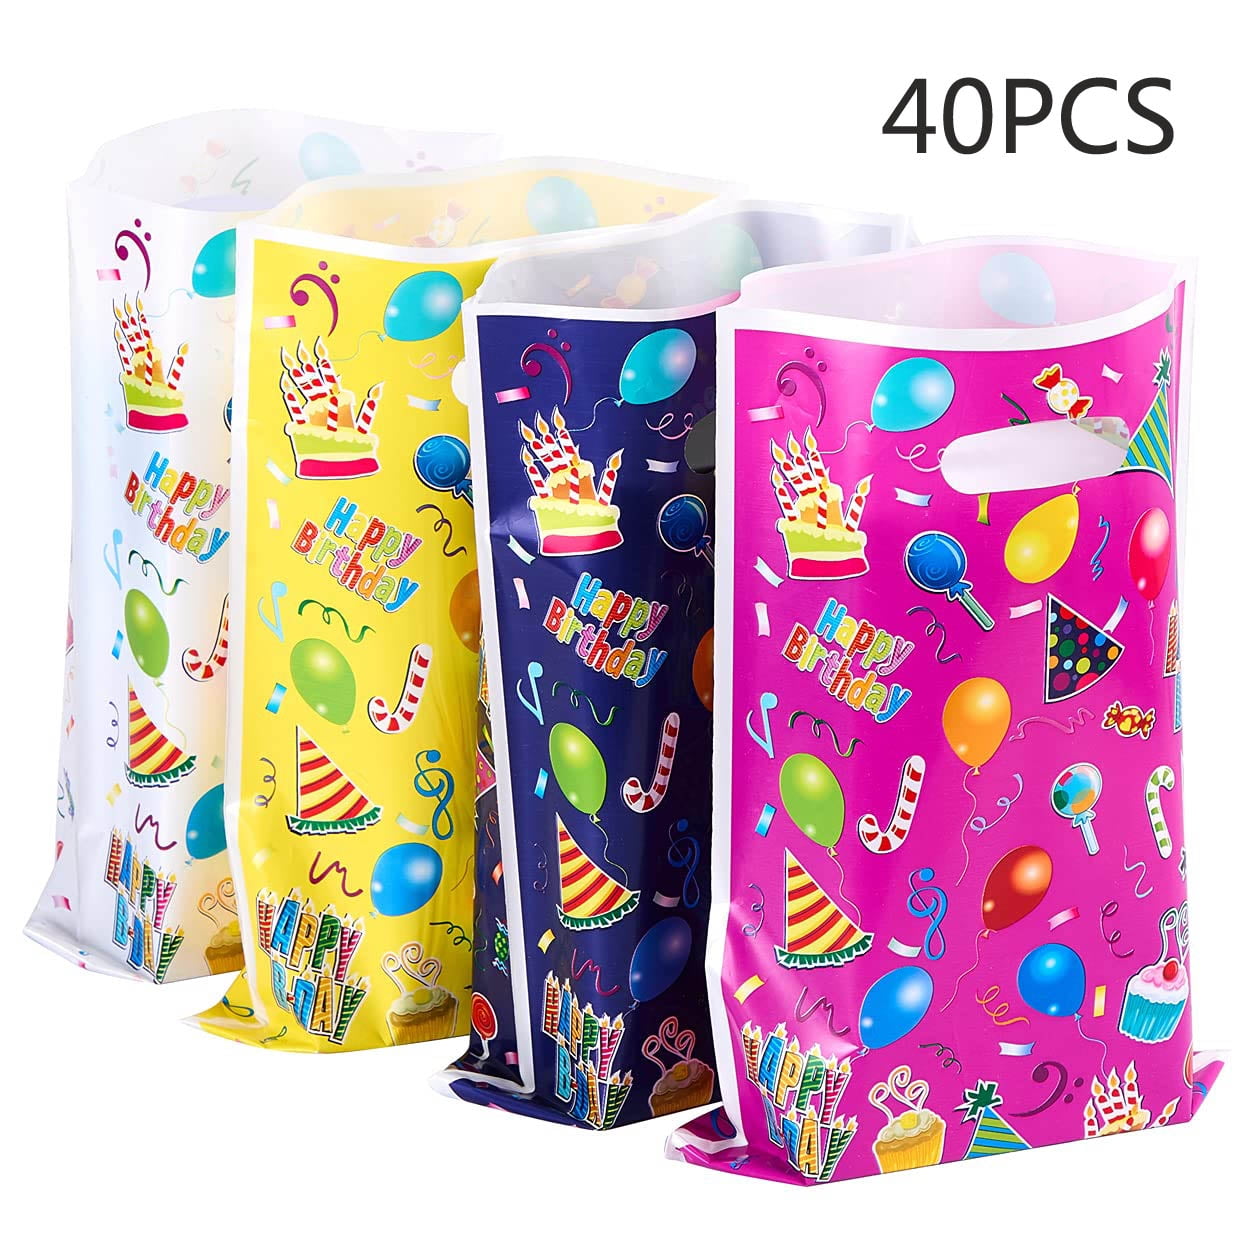 40PCS Incredible 2 Party Napkins for Baby Shower Kids Birthday Party Decorations Supplies 